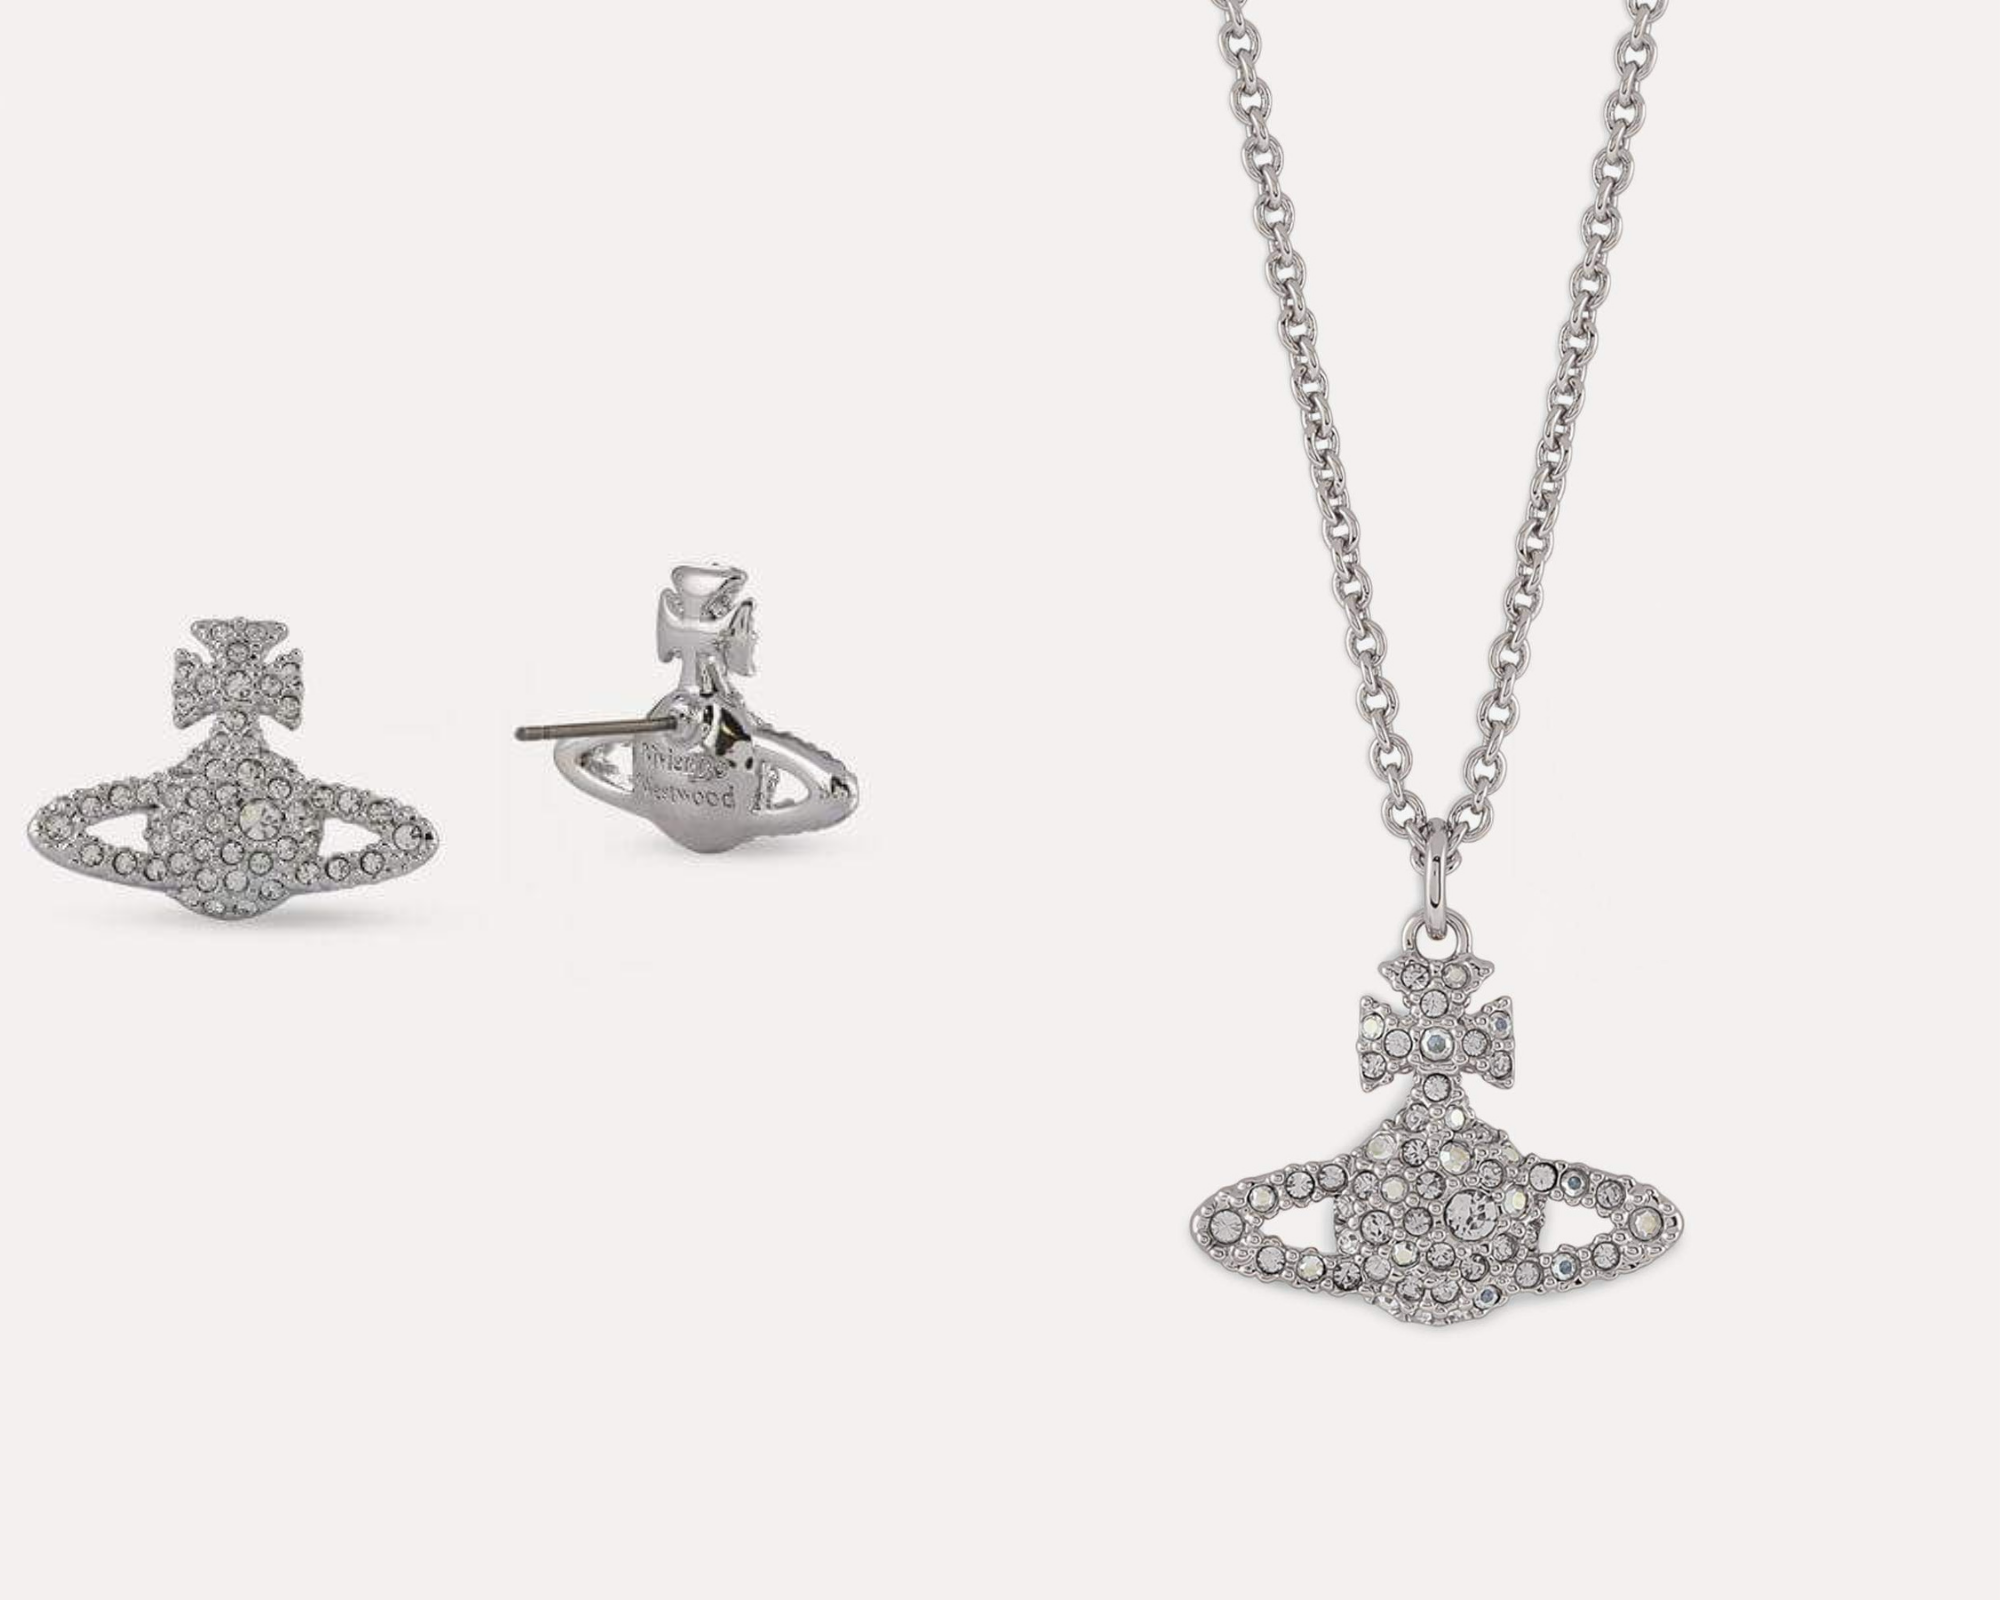 vivienne westwood necklace and earrings set